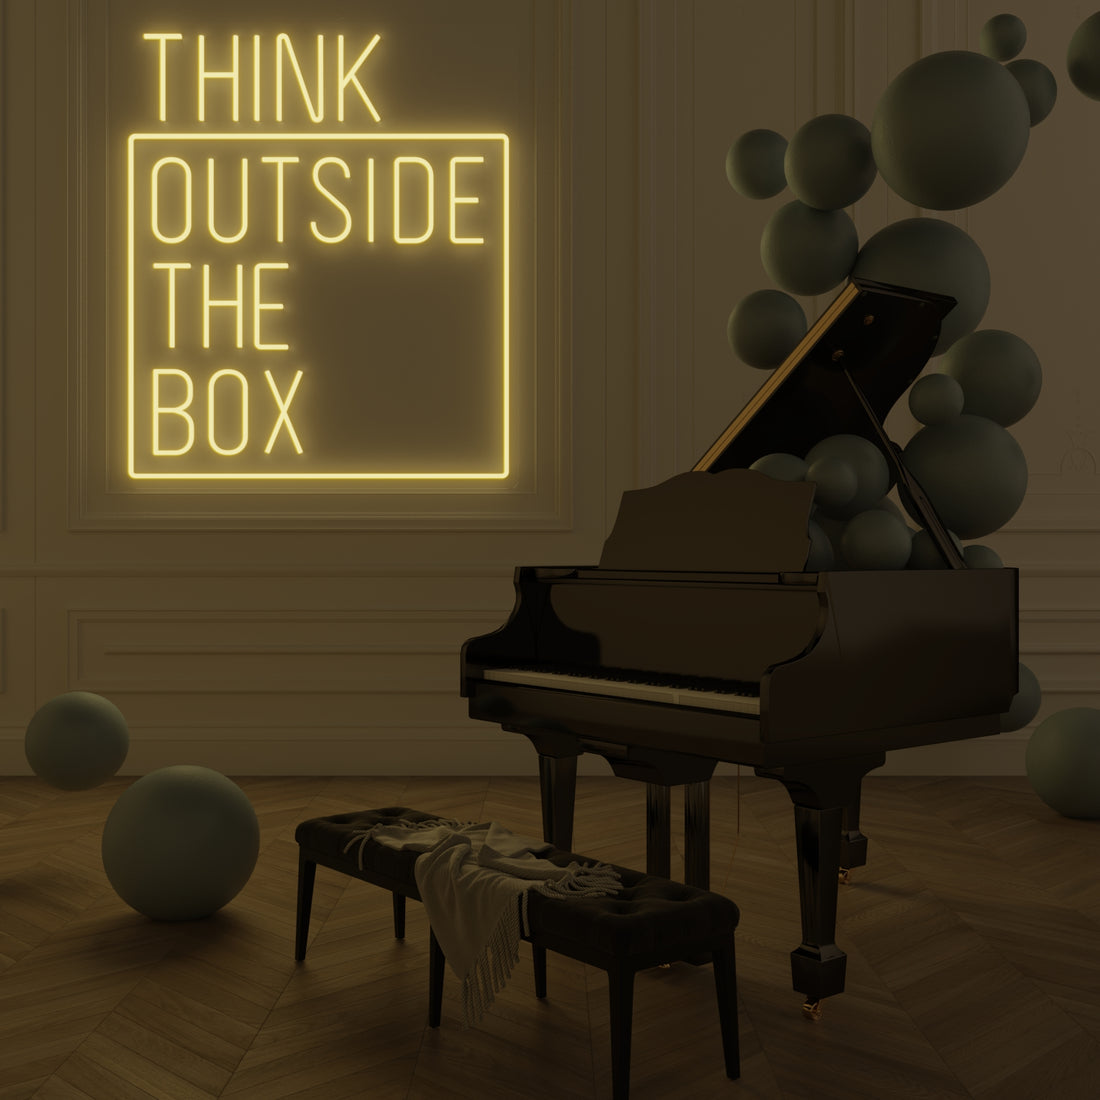 Thinking Outside the Box